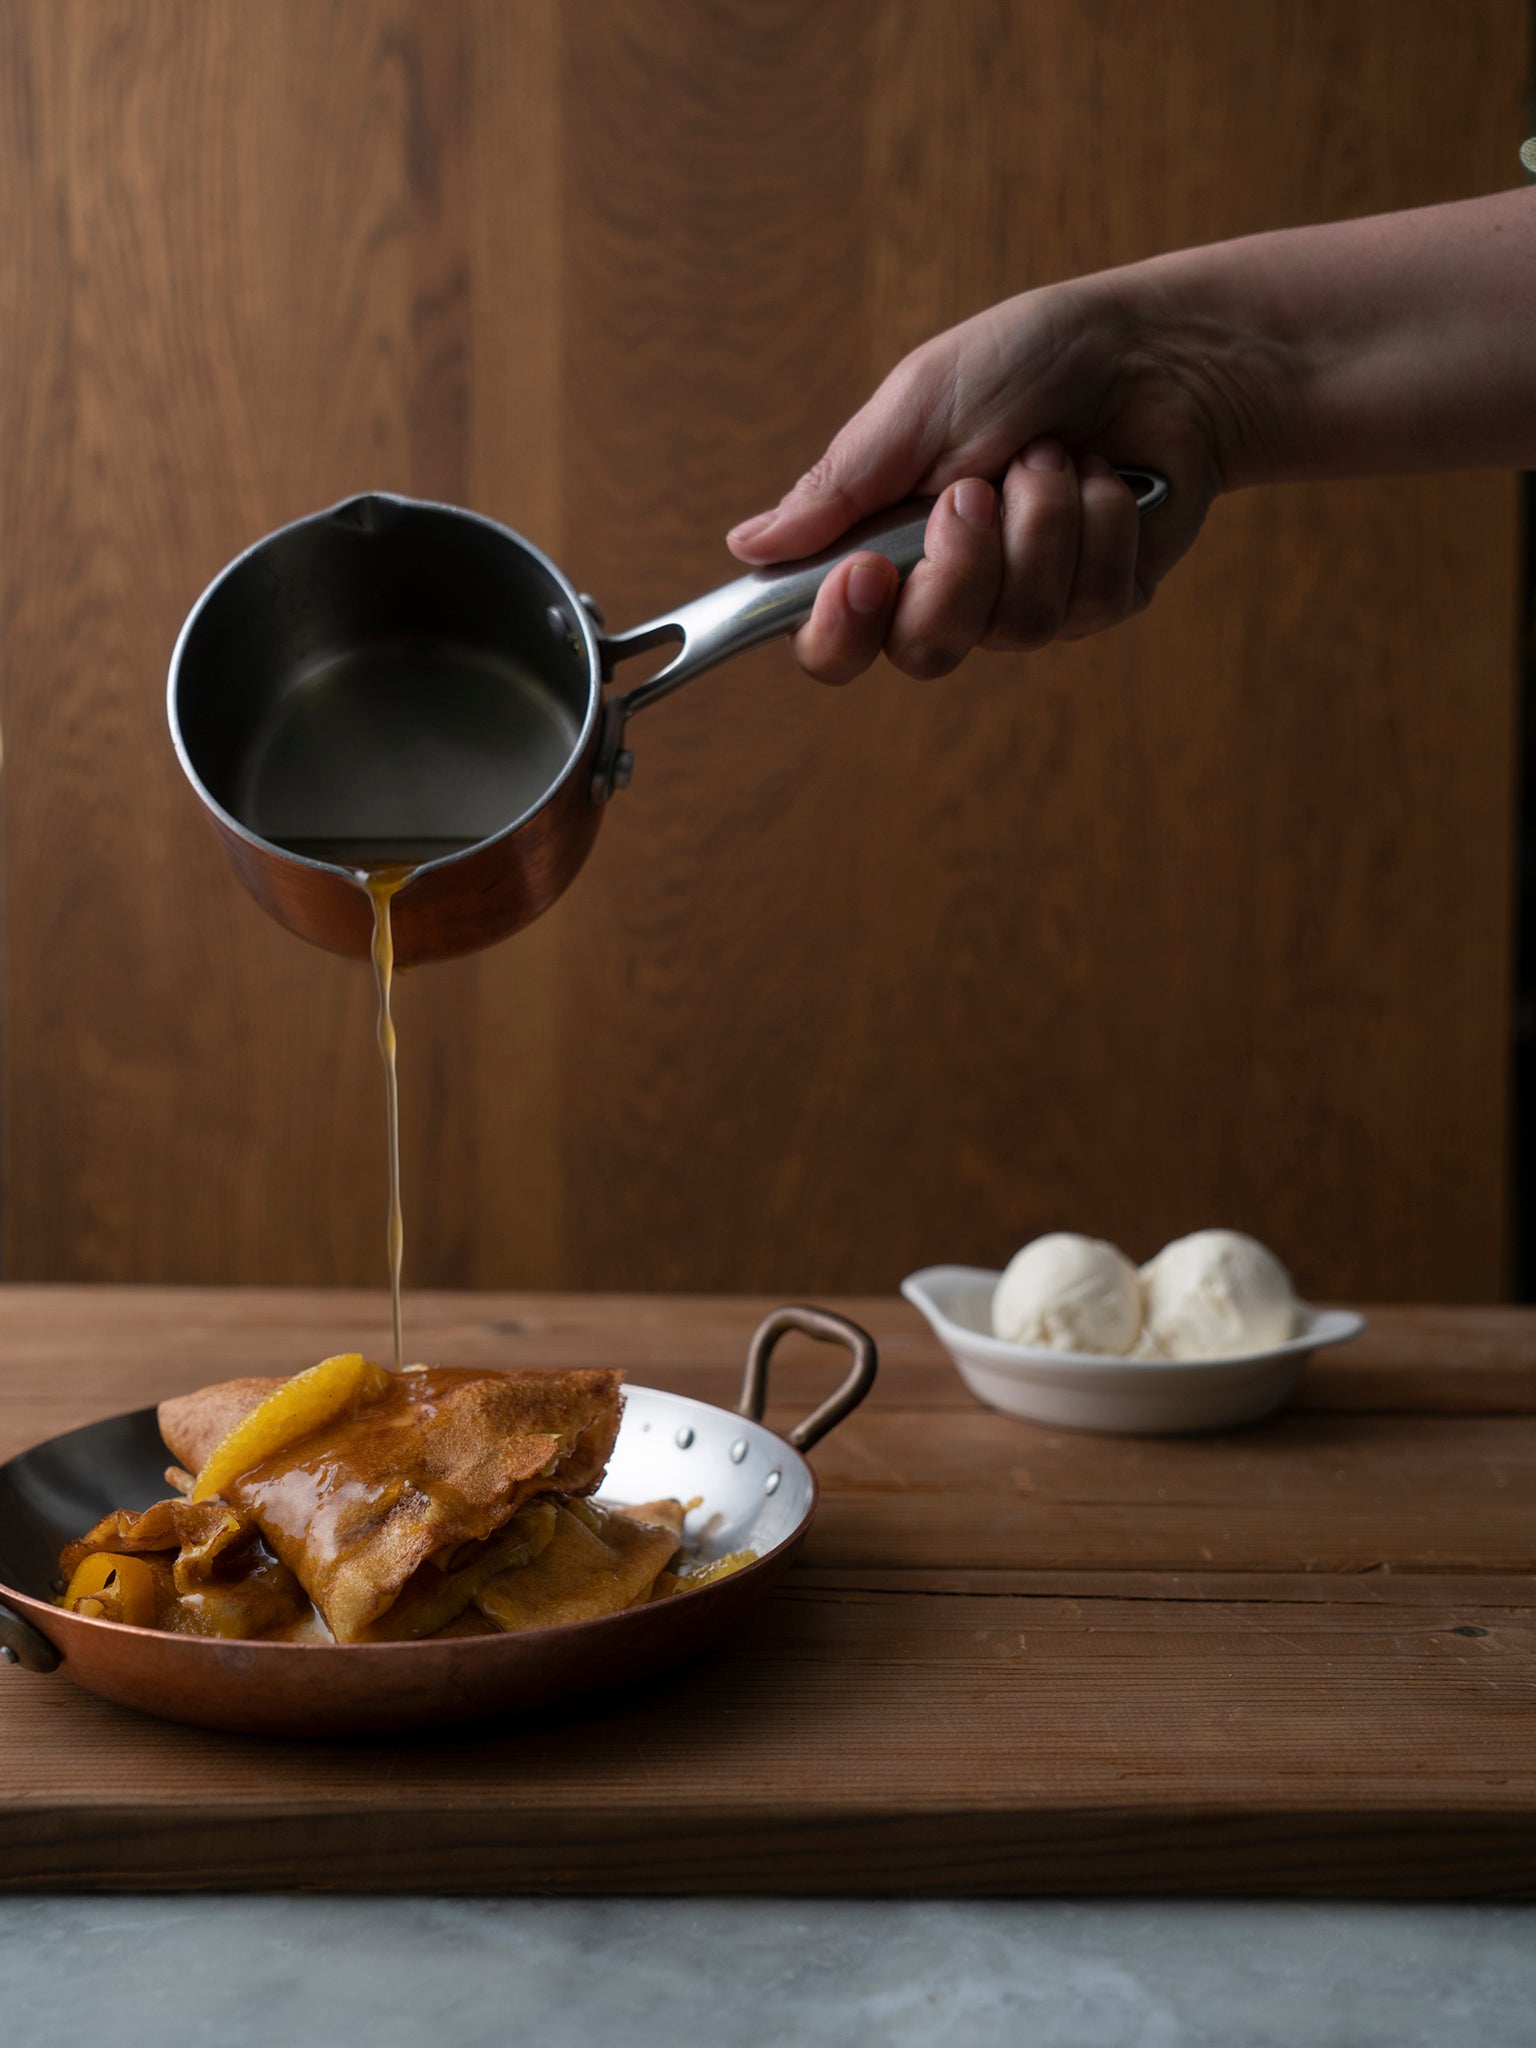 Crepes suzette were created by accident when a dessert caught fire